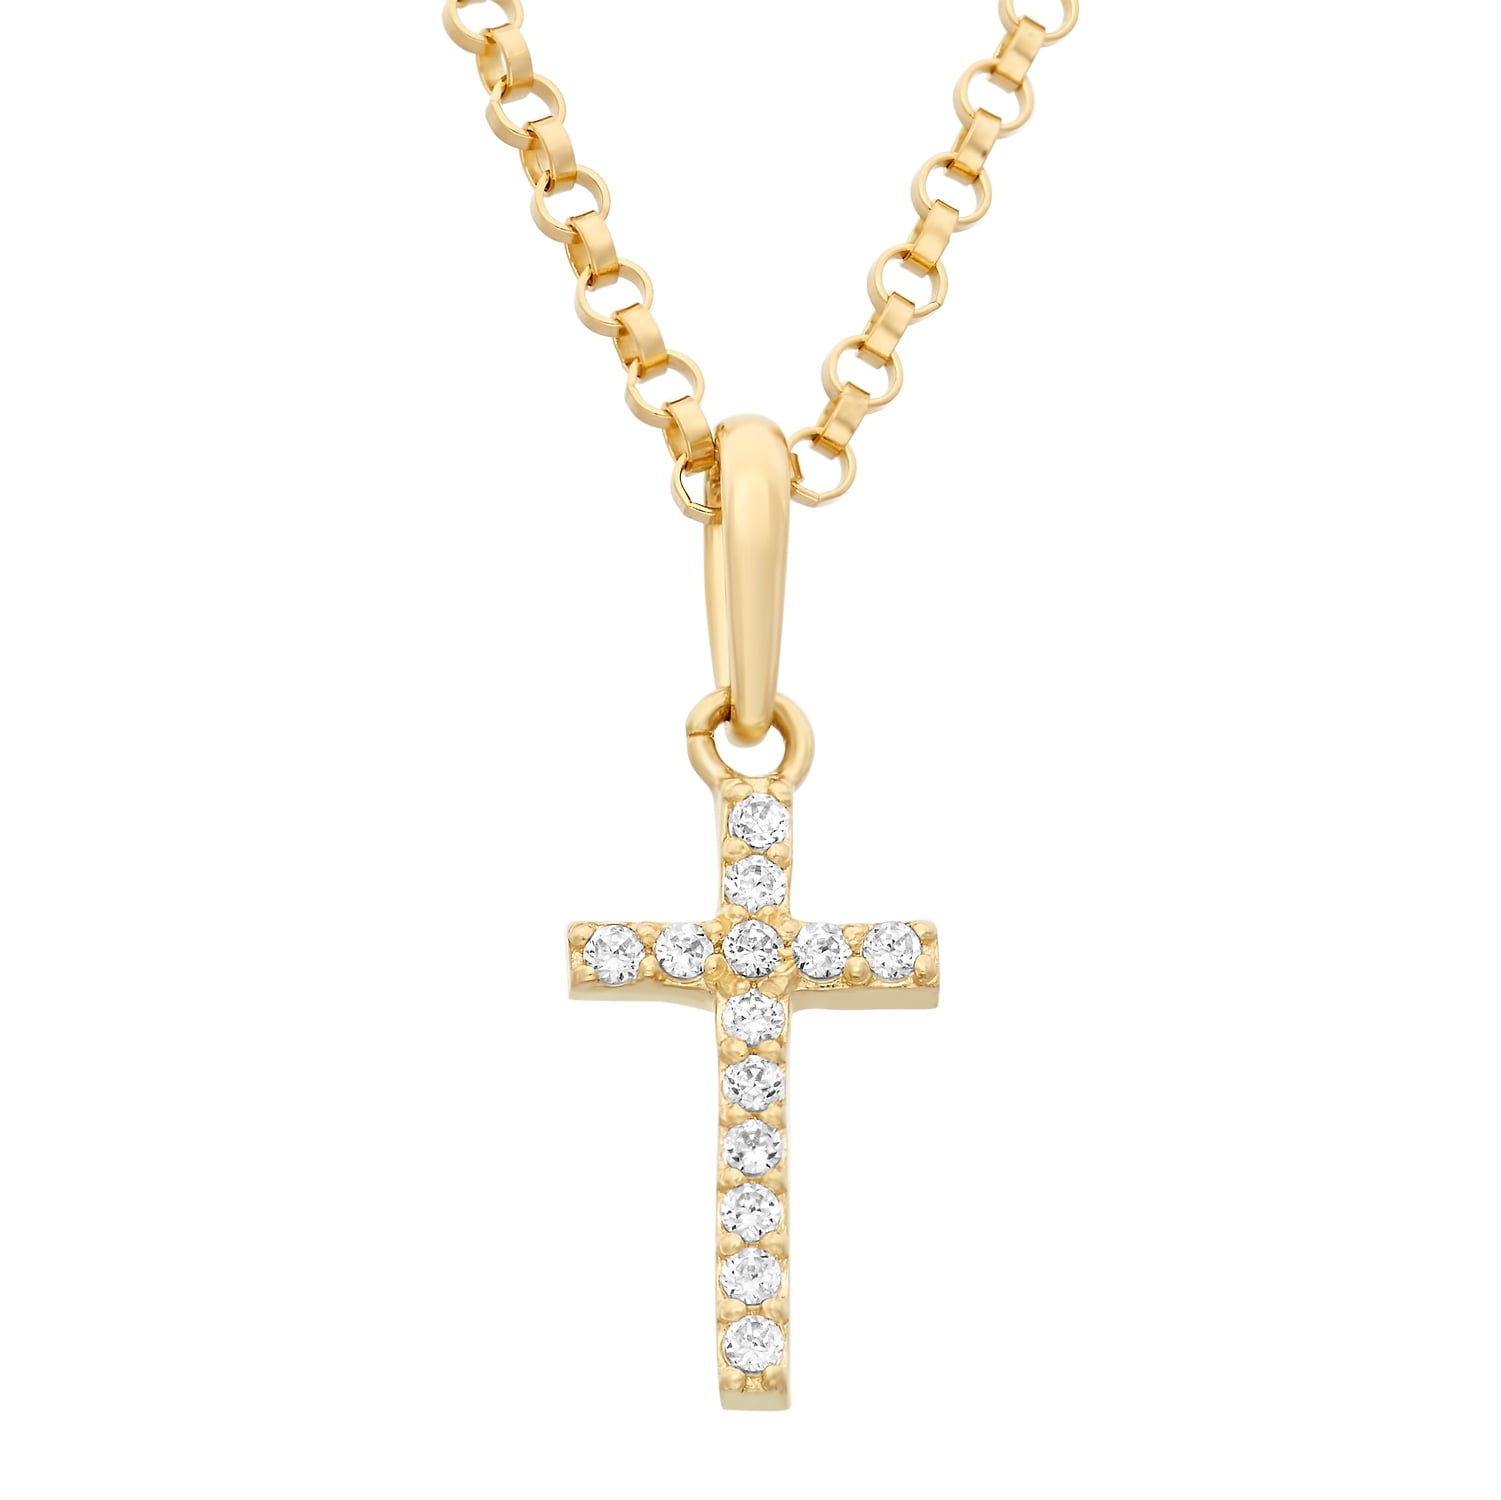 Real ITALIAN 14K Rhodium Gold Filled Cross Chain Necklace 